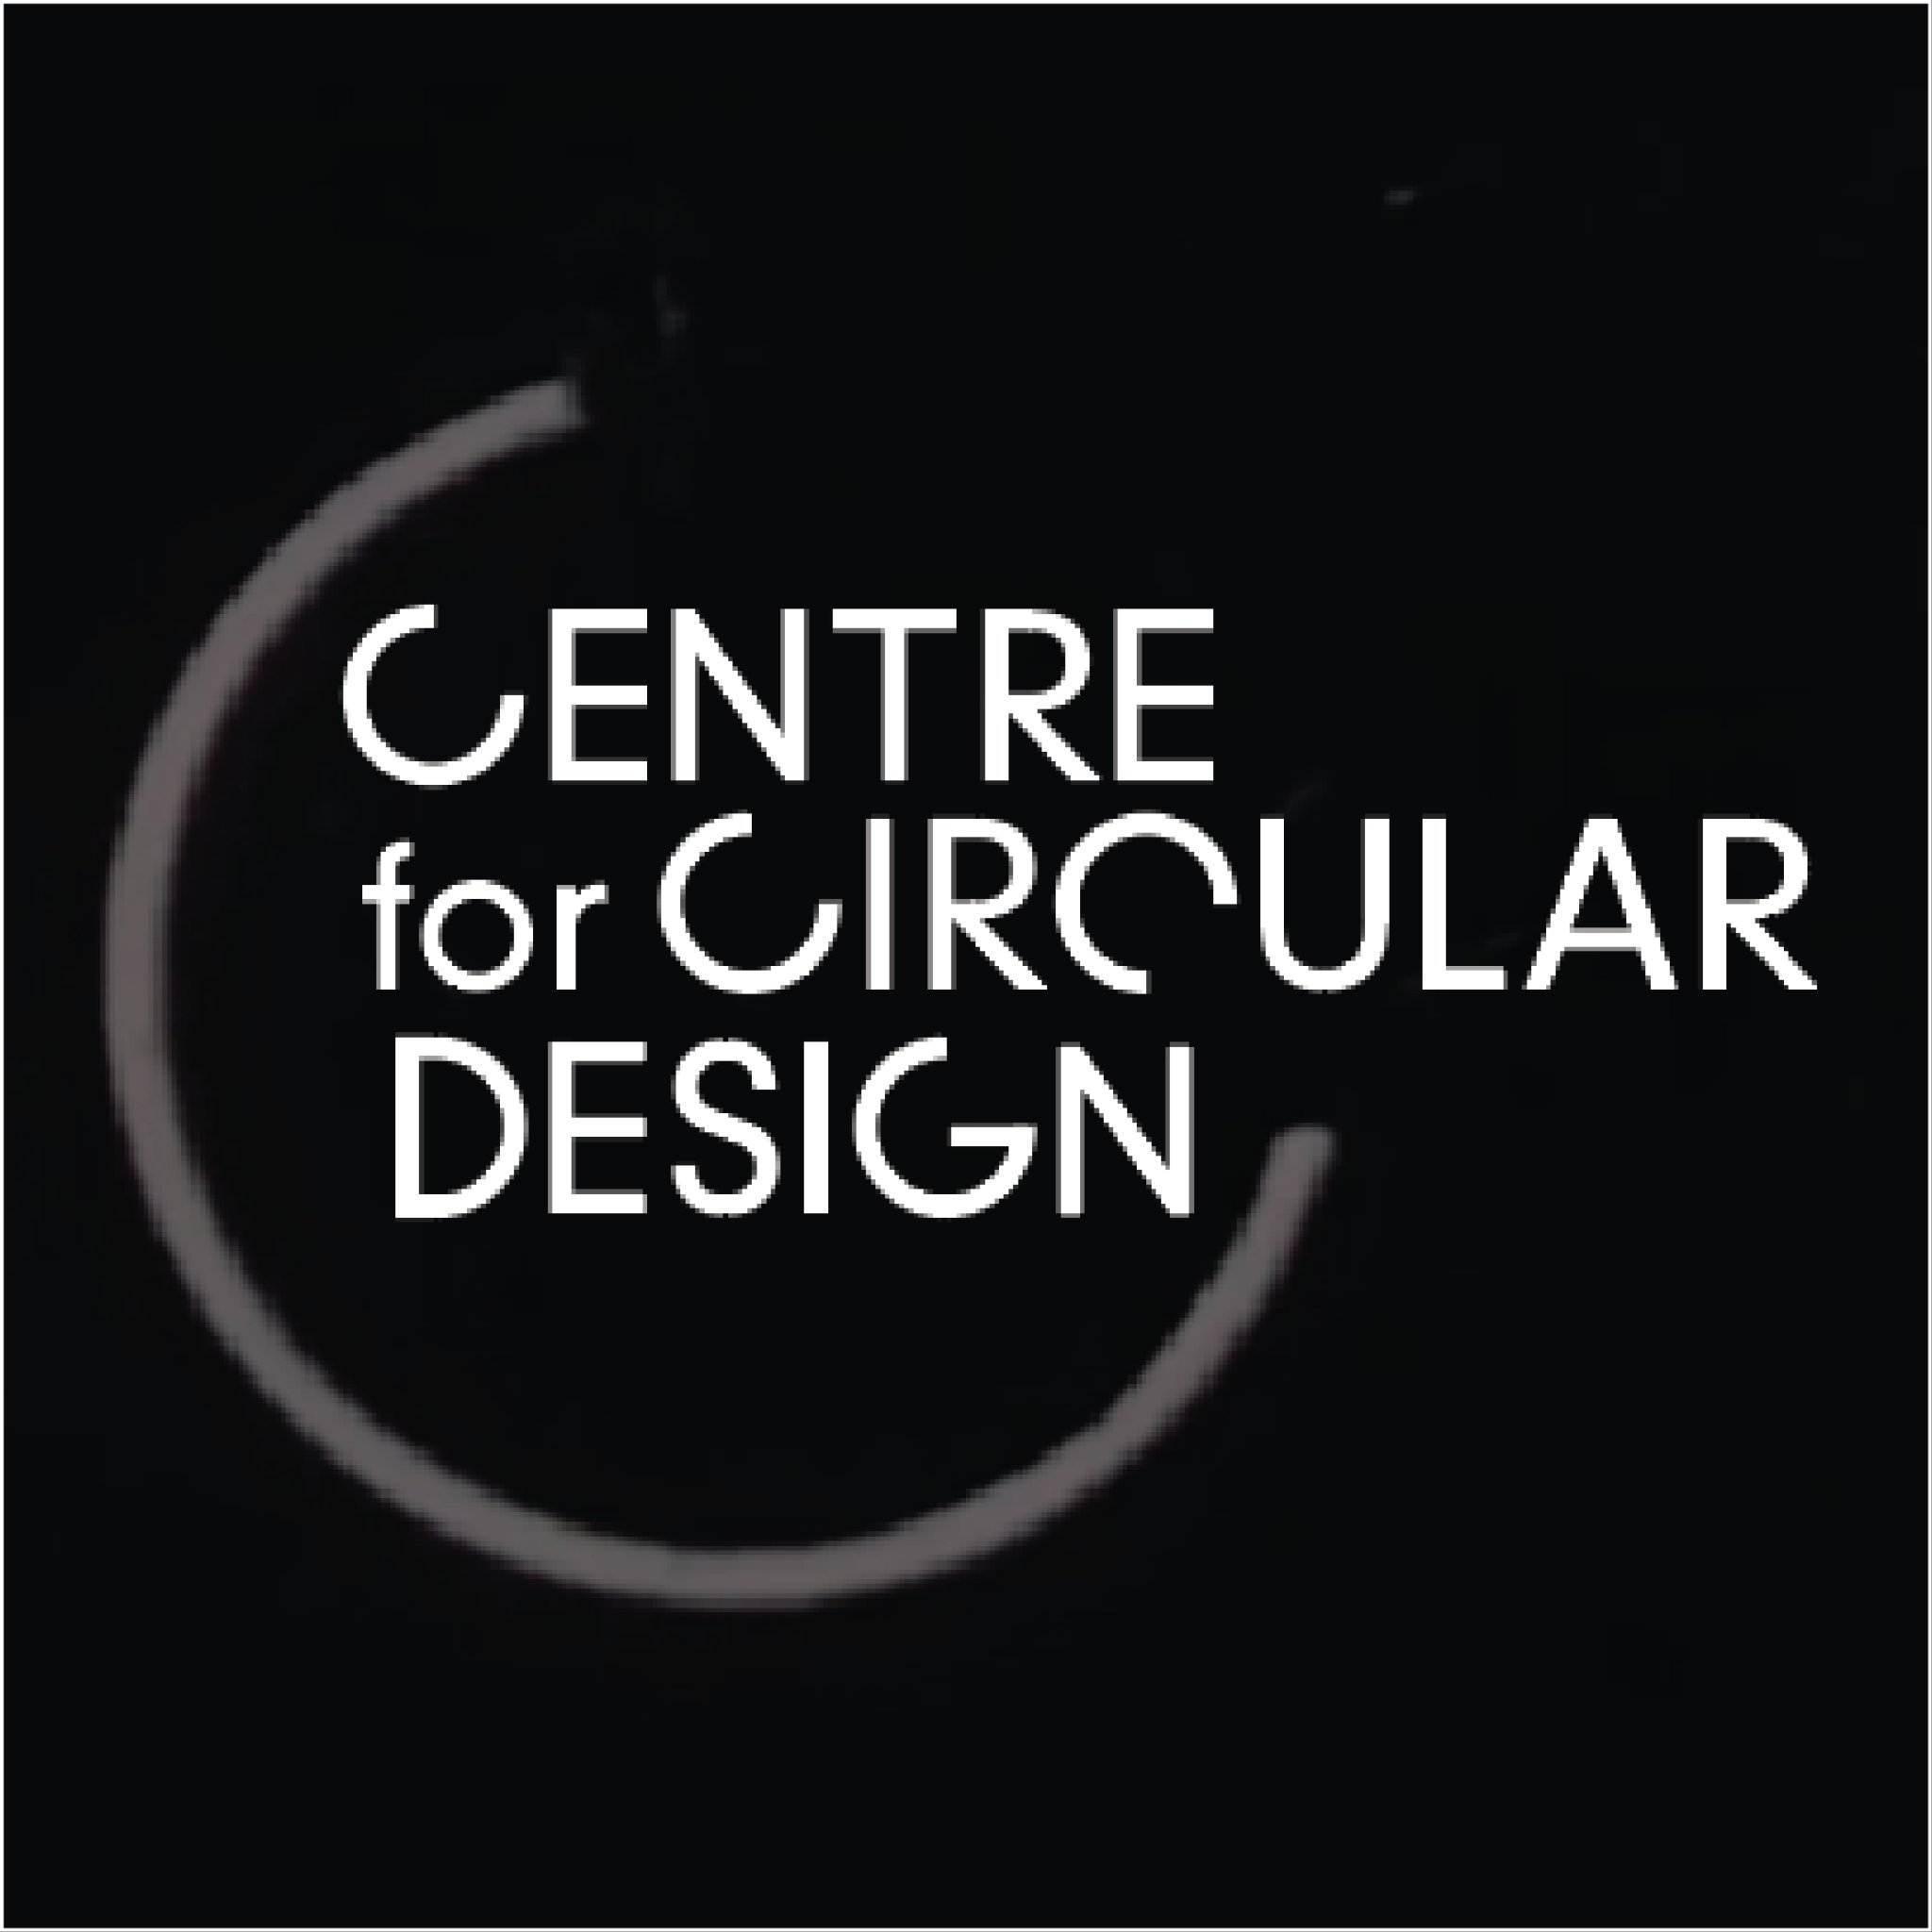 Design Research for the Circular Economy through MATERIALS, MODELS and MINDSETS